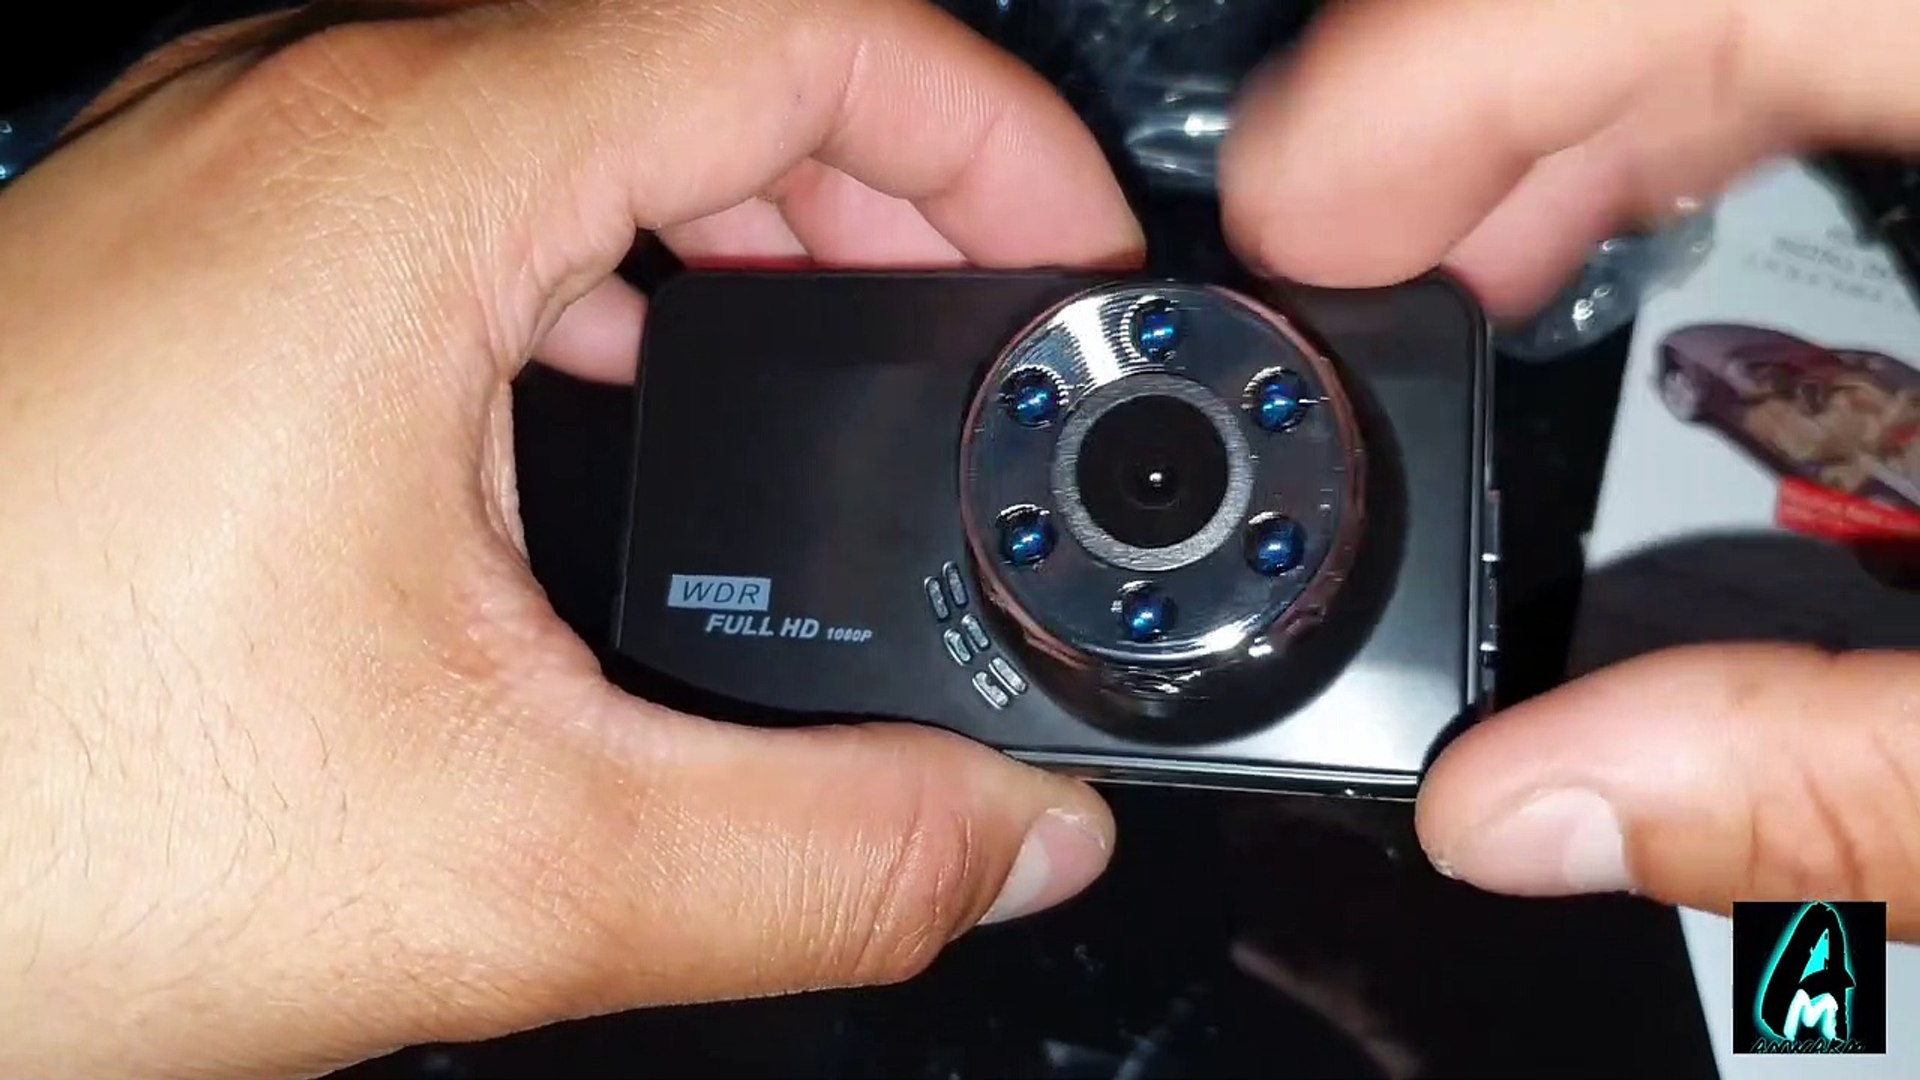 Orskey S800 Dashcam (Review) - video Dailymotion